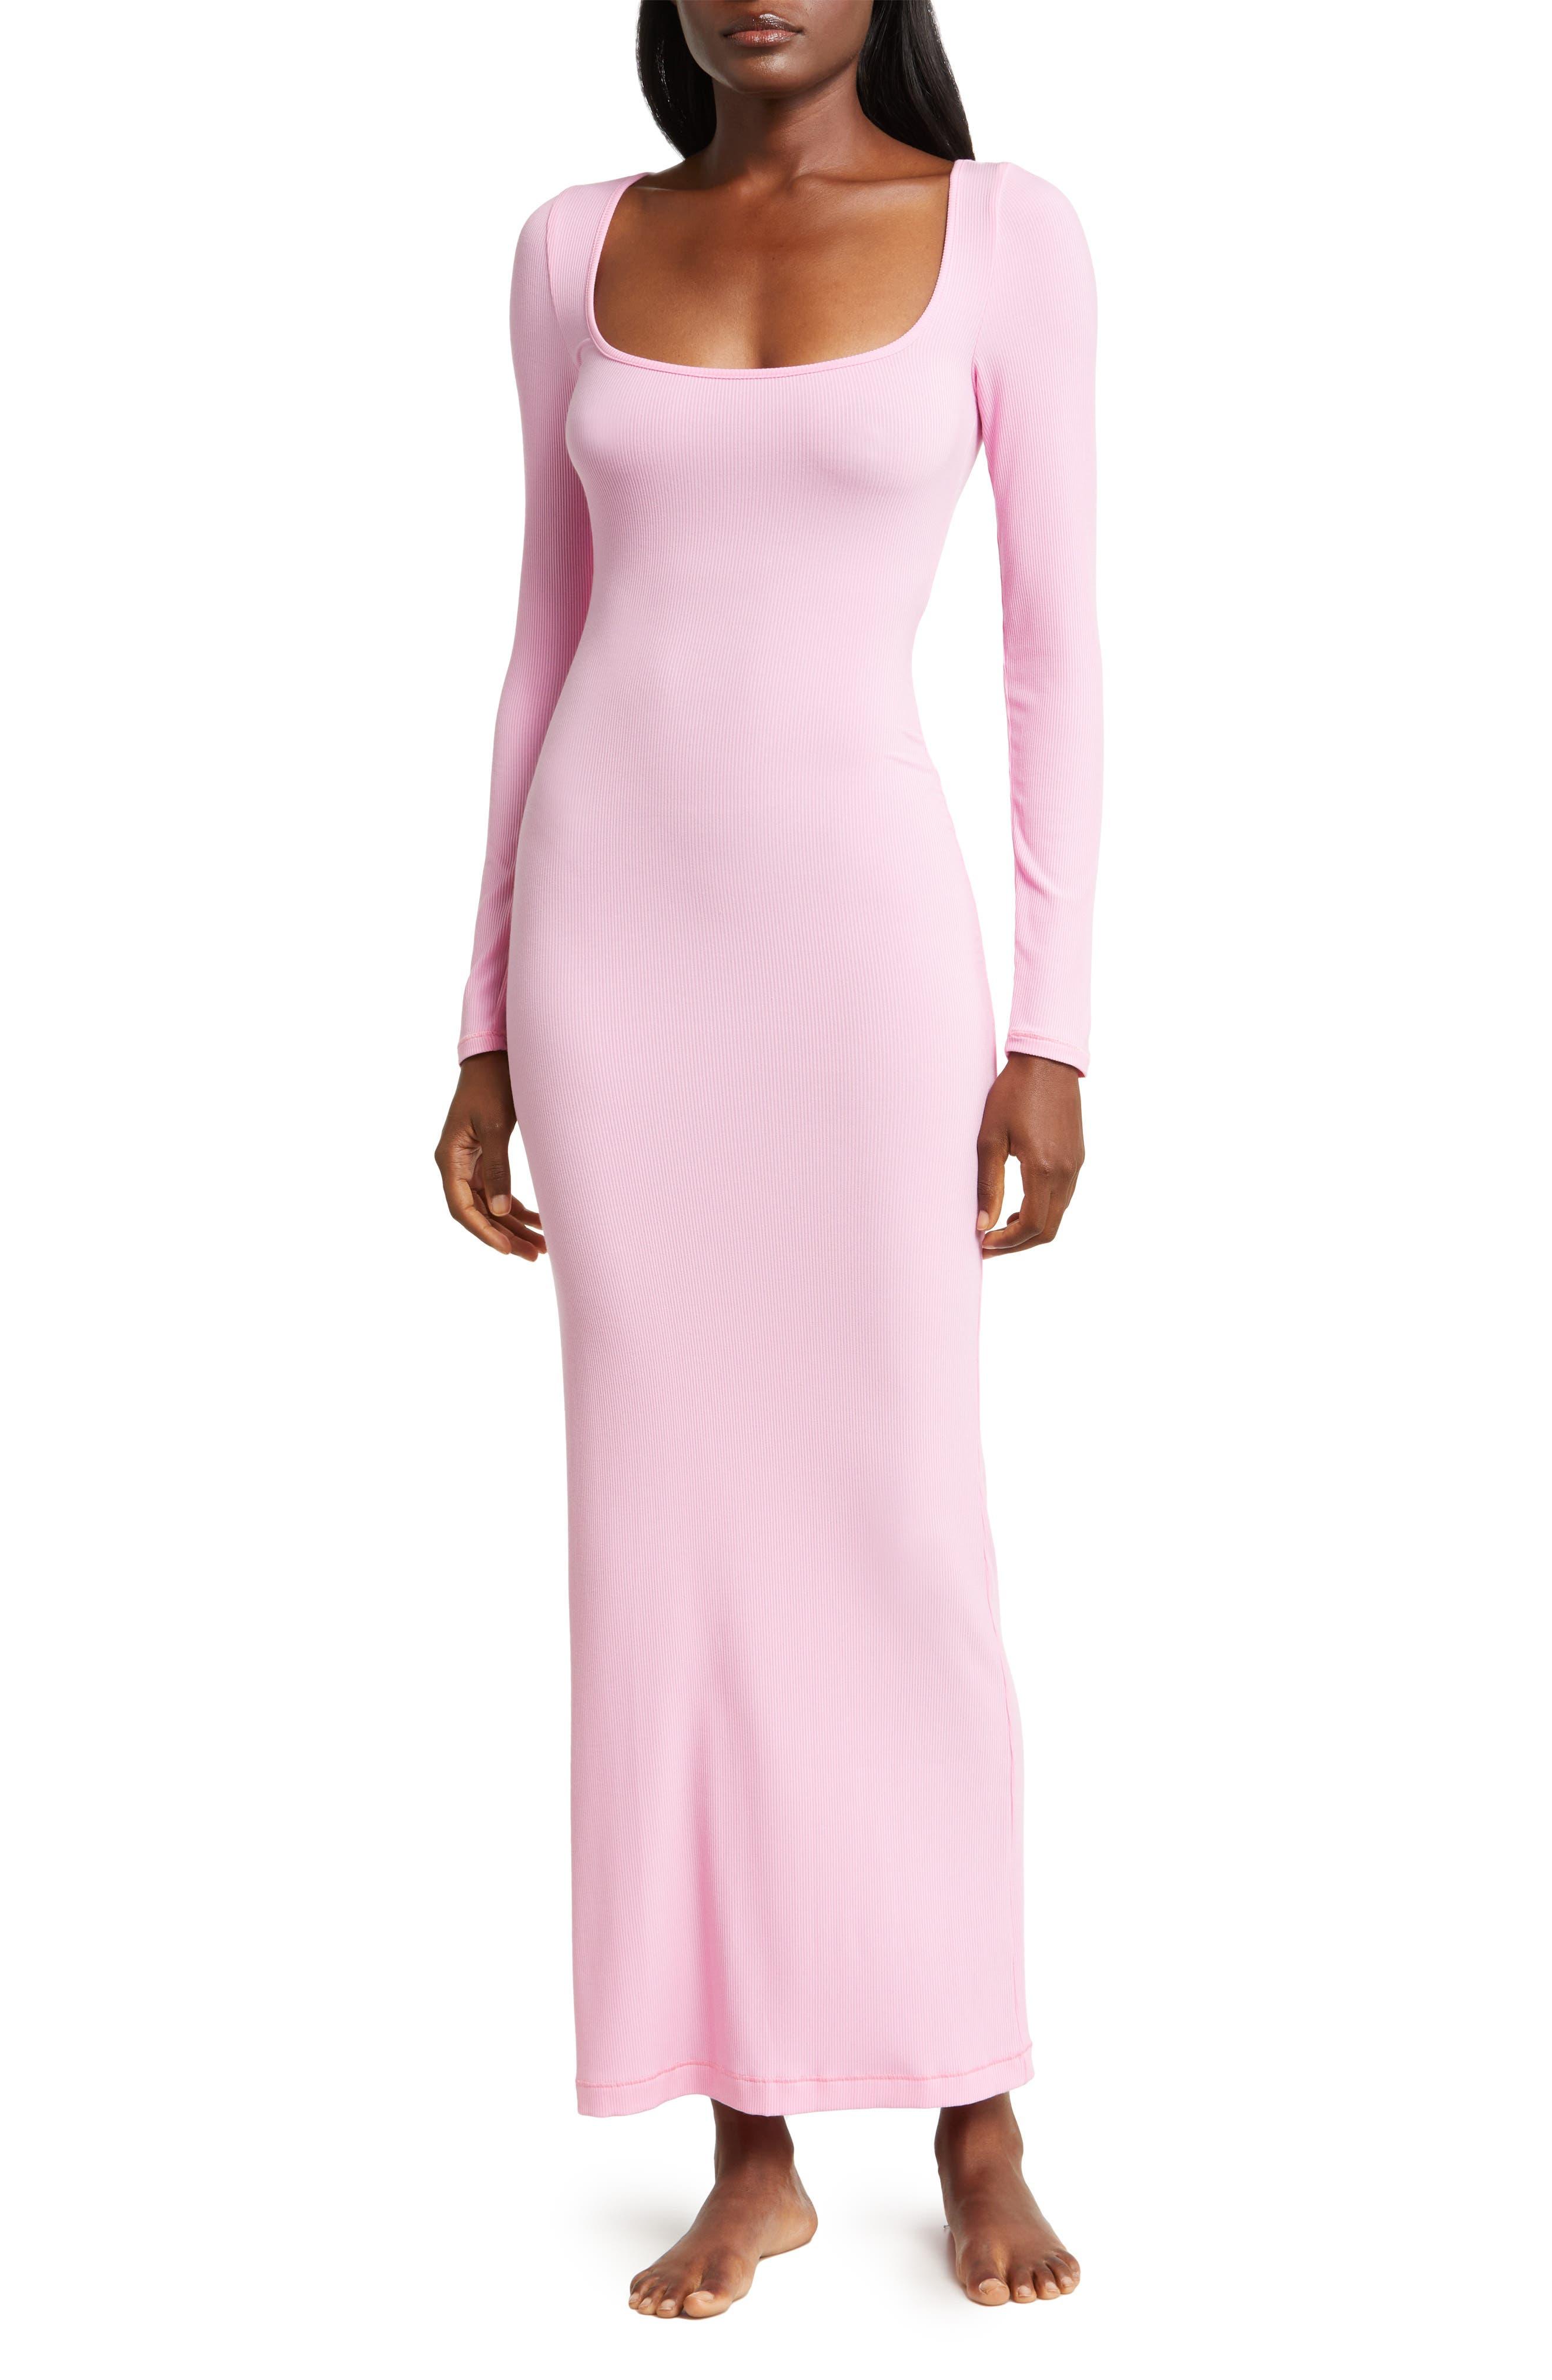 Skims Soft Lounge Long Sleeve Dress in Pink | Lyst